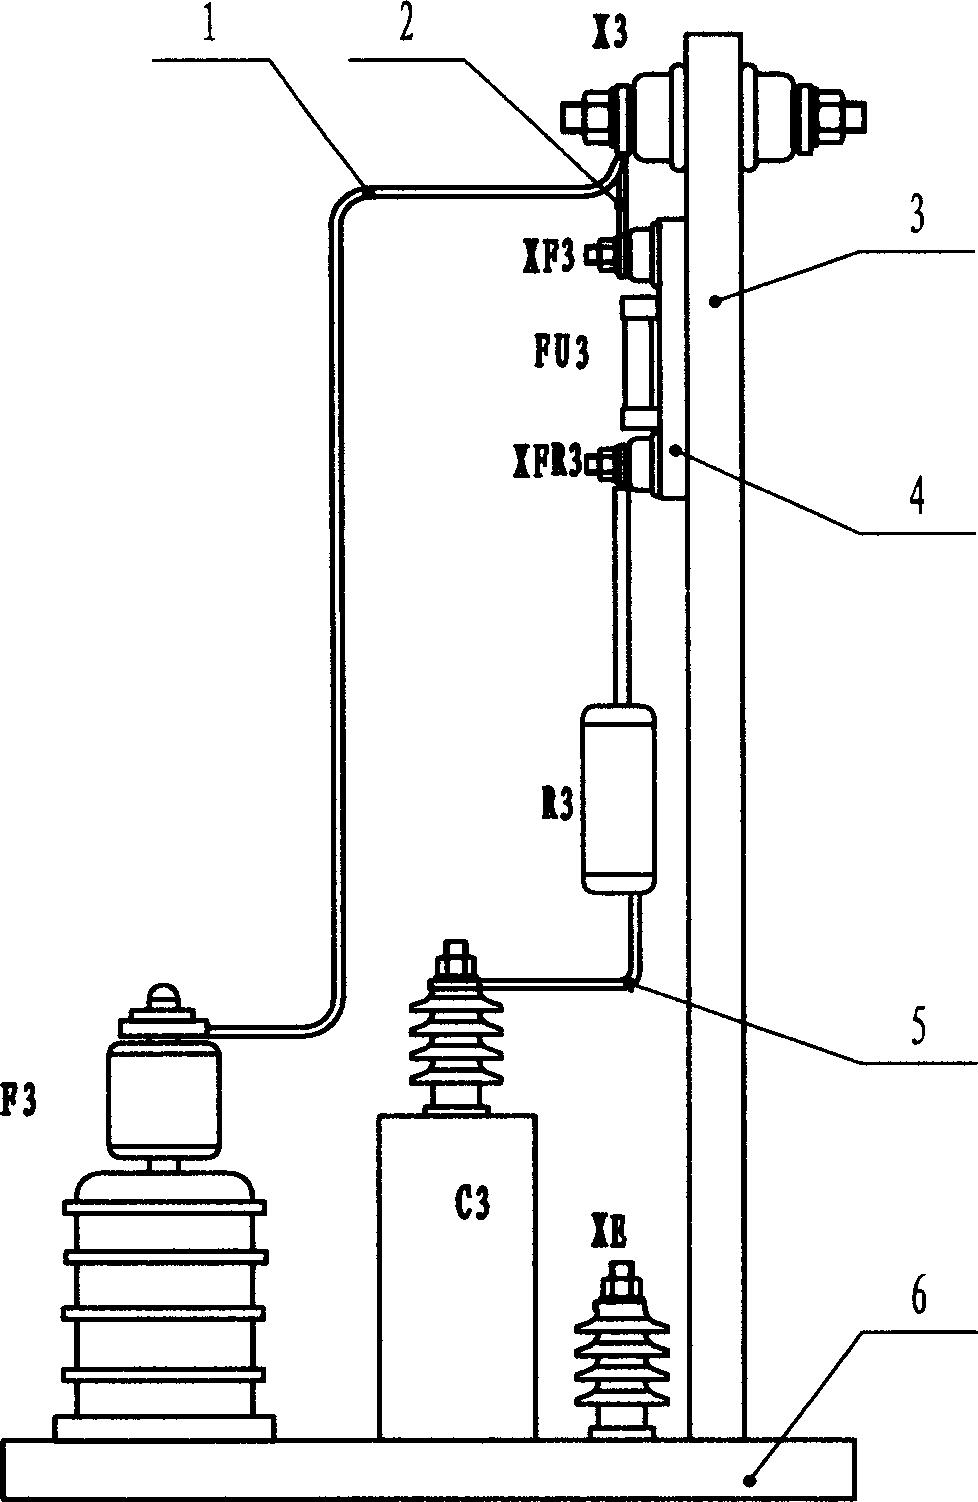 High power motor over-voltage protection device